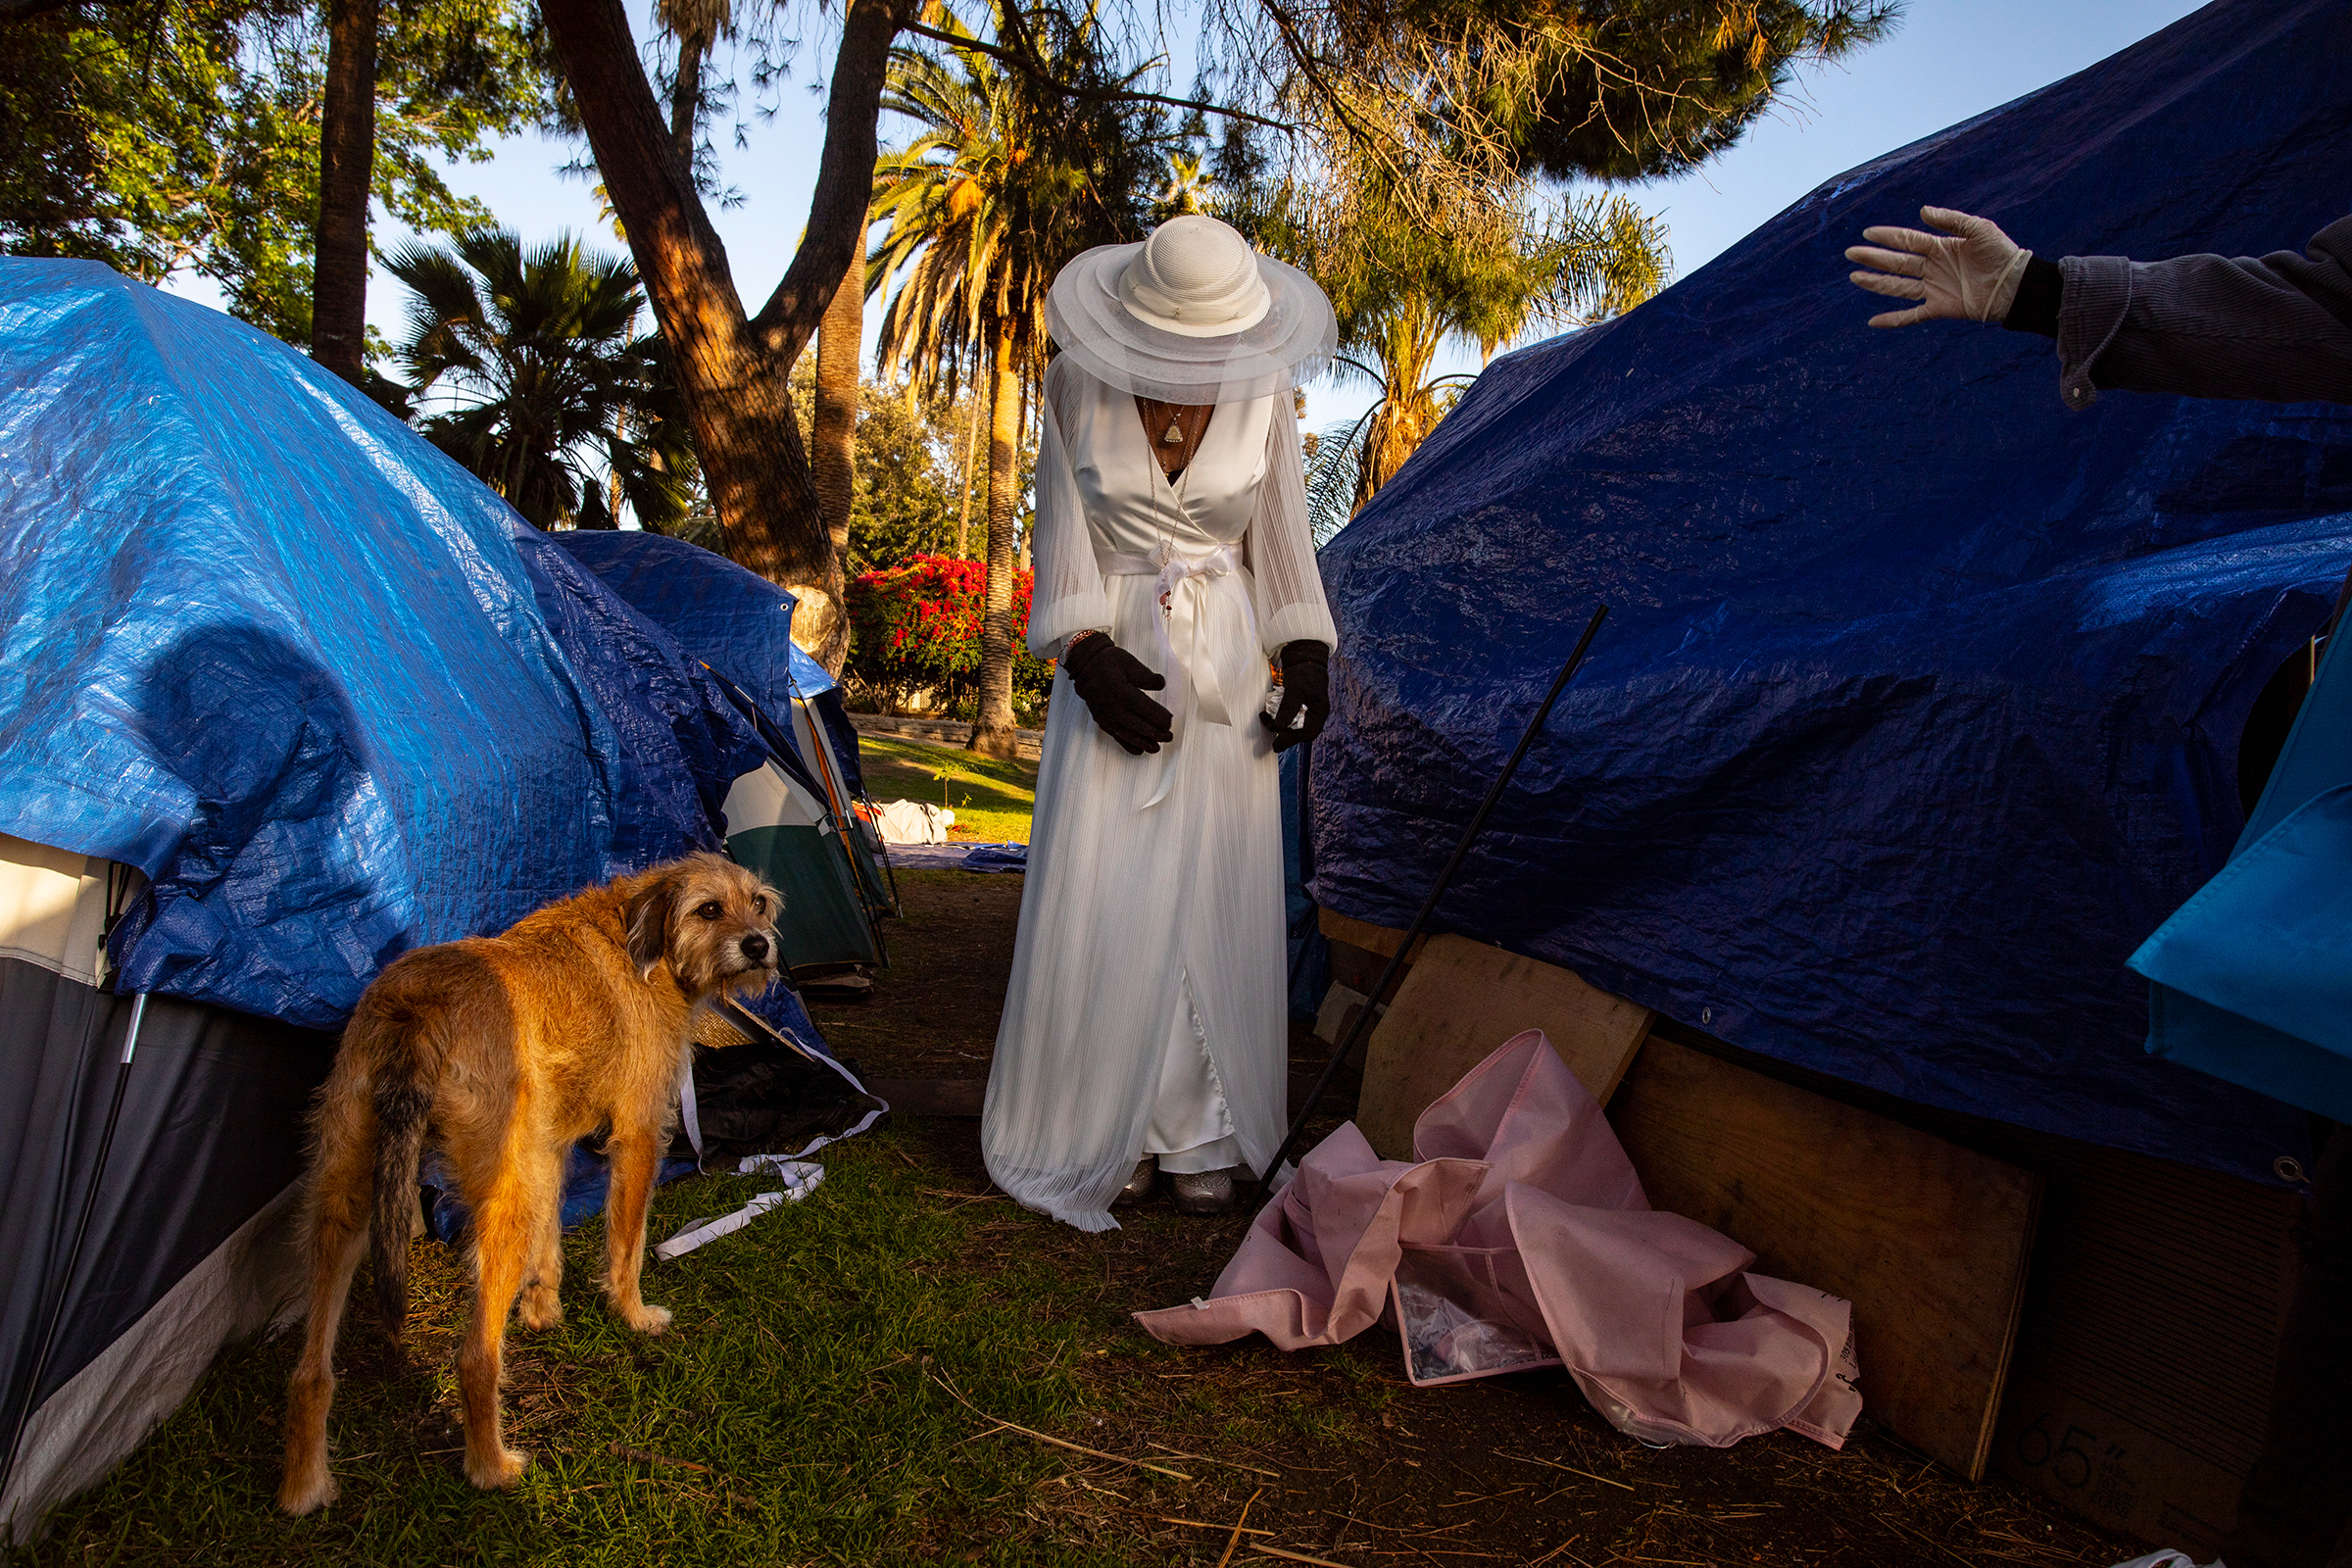 Valerie Zeller, 52, cries during her first-ever wedding dress fitting by the side of her tent in Echo Park Lake, in Los Angeles, on March 13. A seamstress donated a dress and assisted with a fitting a week before the wedding to be sure the alterations would be ready for Zeller's special day. Days after the <a href=